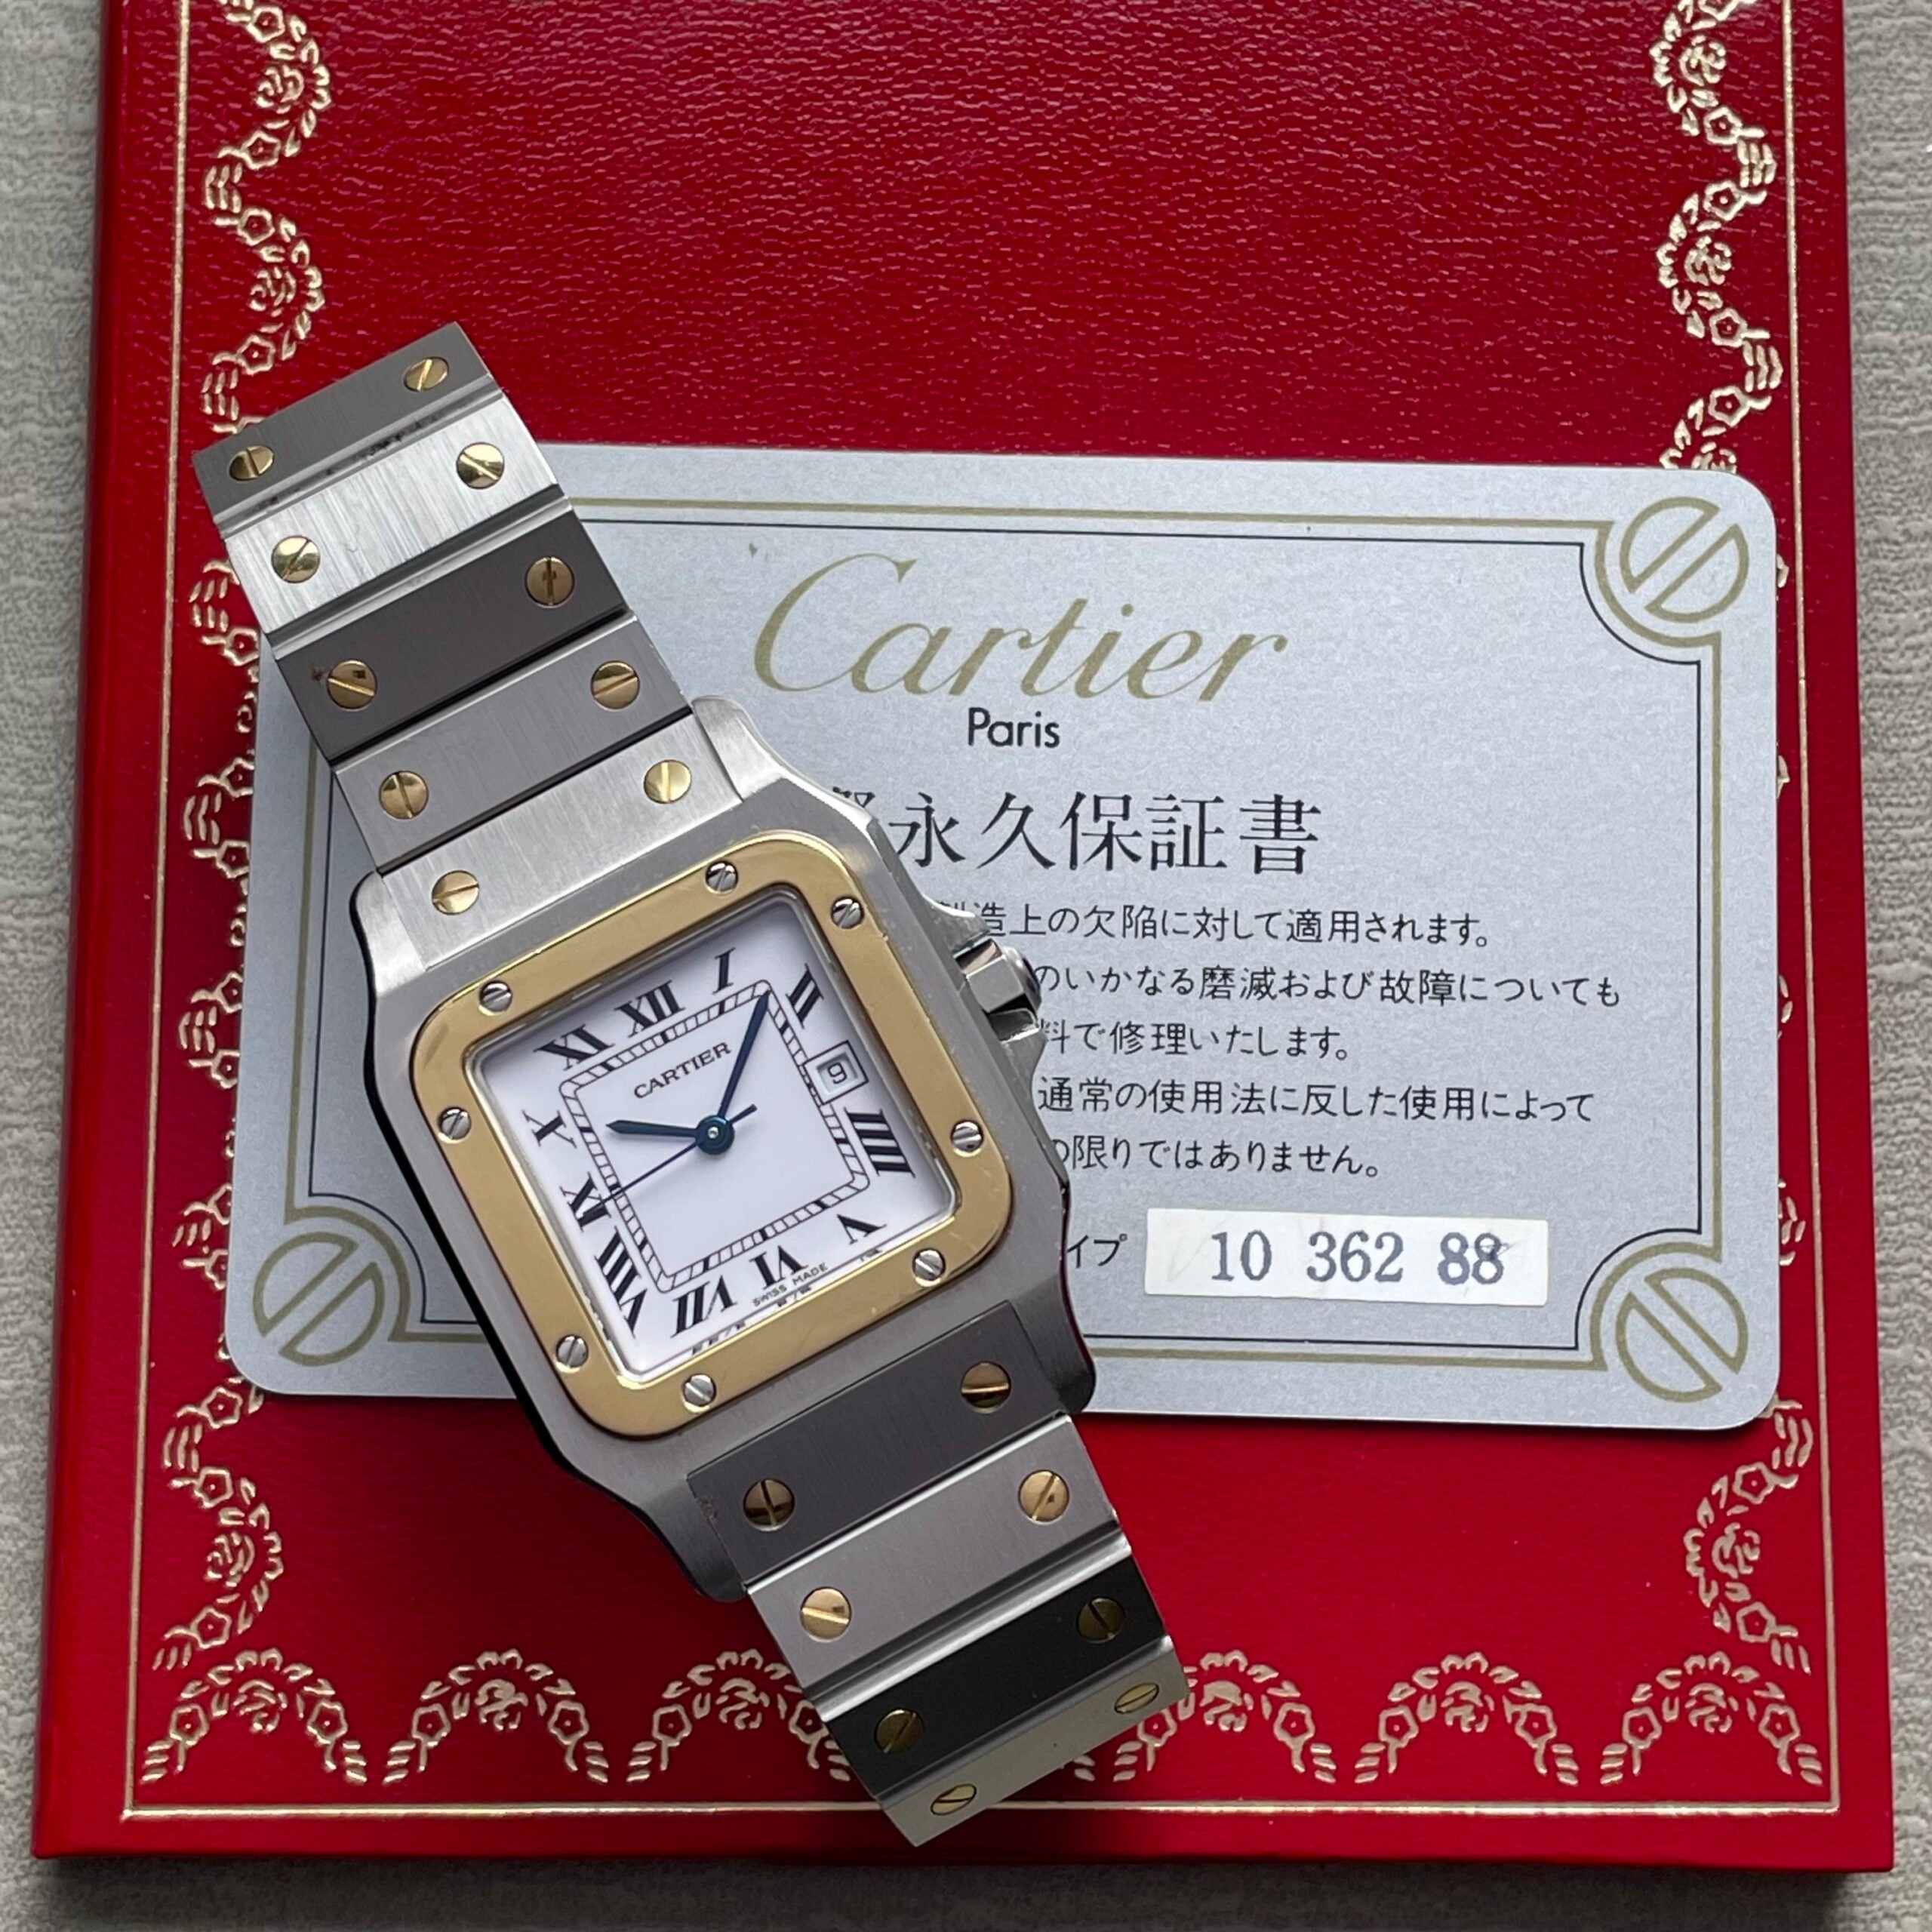 【Cartier】サントスガルベLMコンビ永久保証書付き